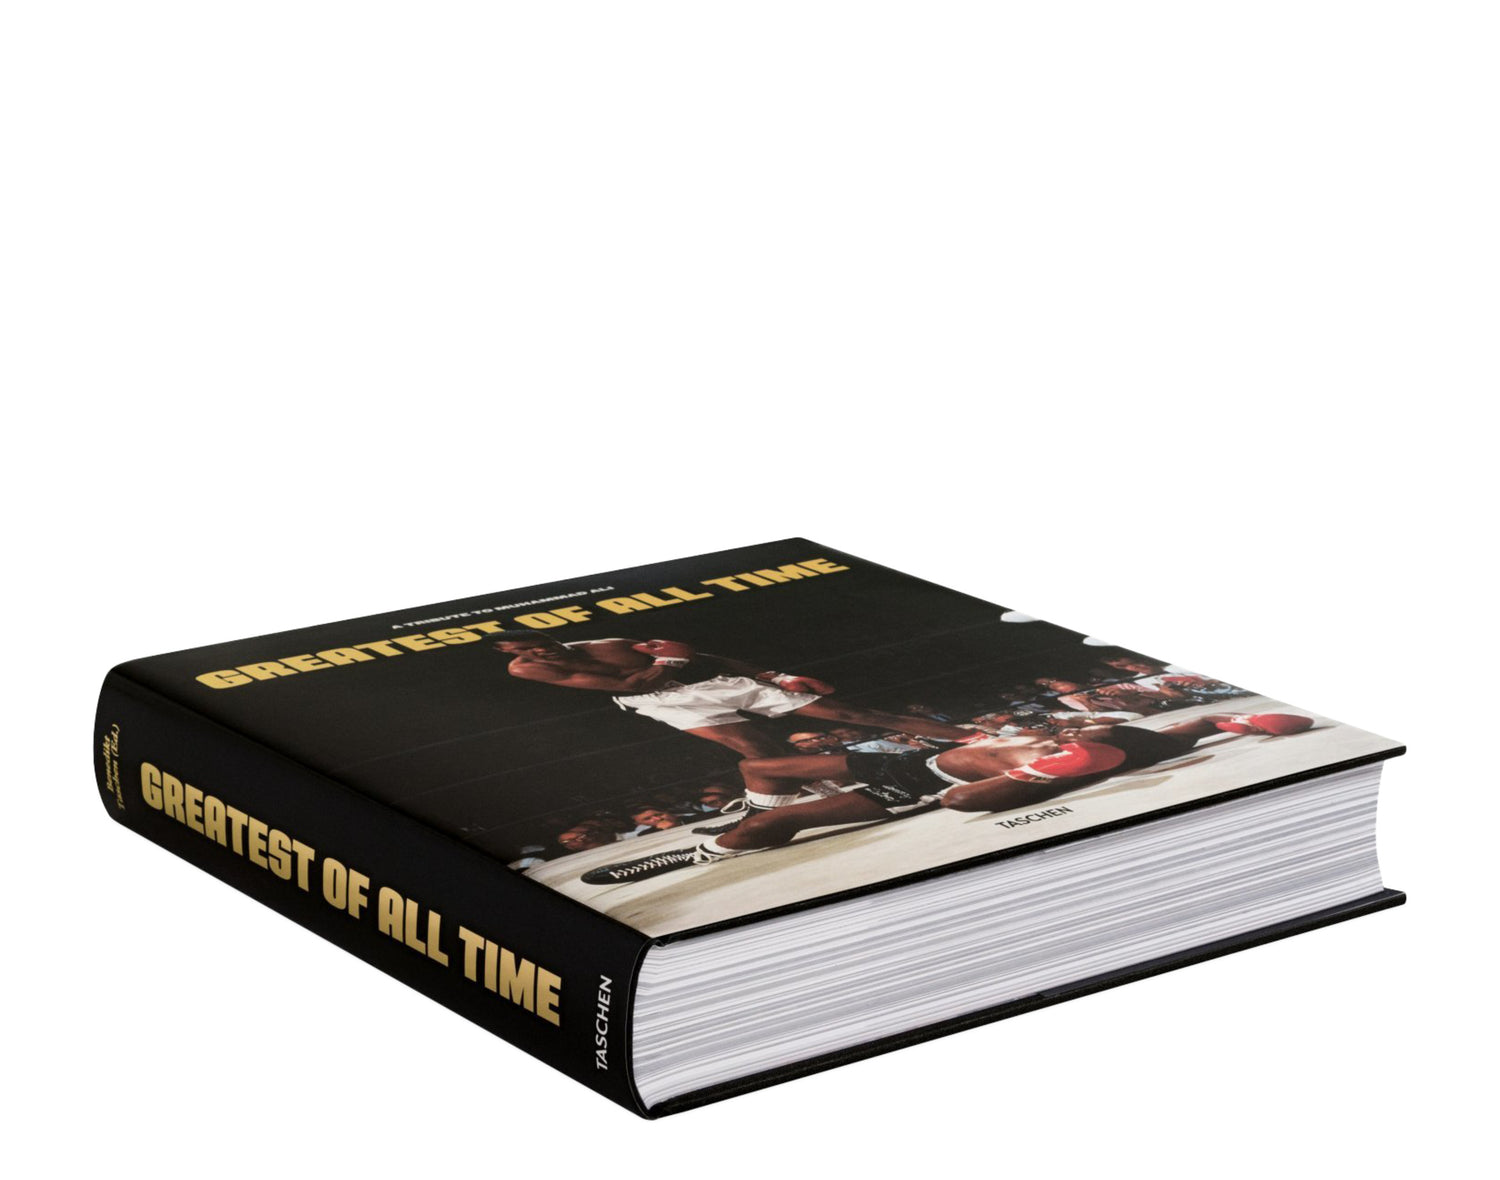 Taschen Books - Greatest of All Time - A Tribute to Muhammad Ali Hardcover Book